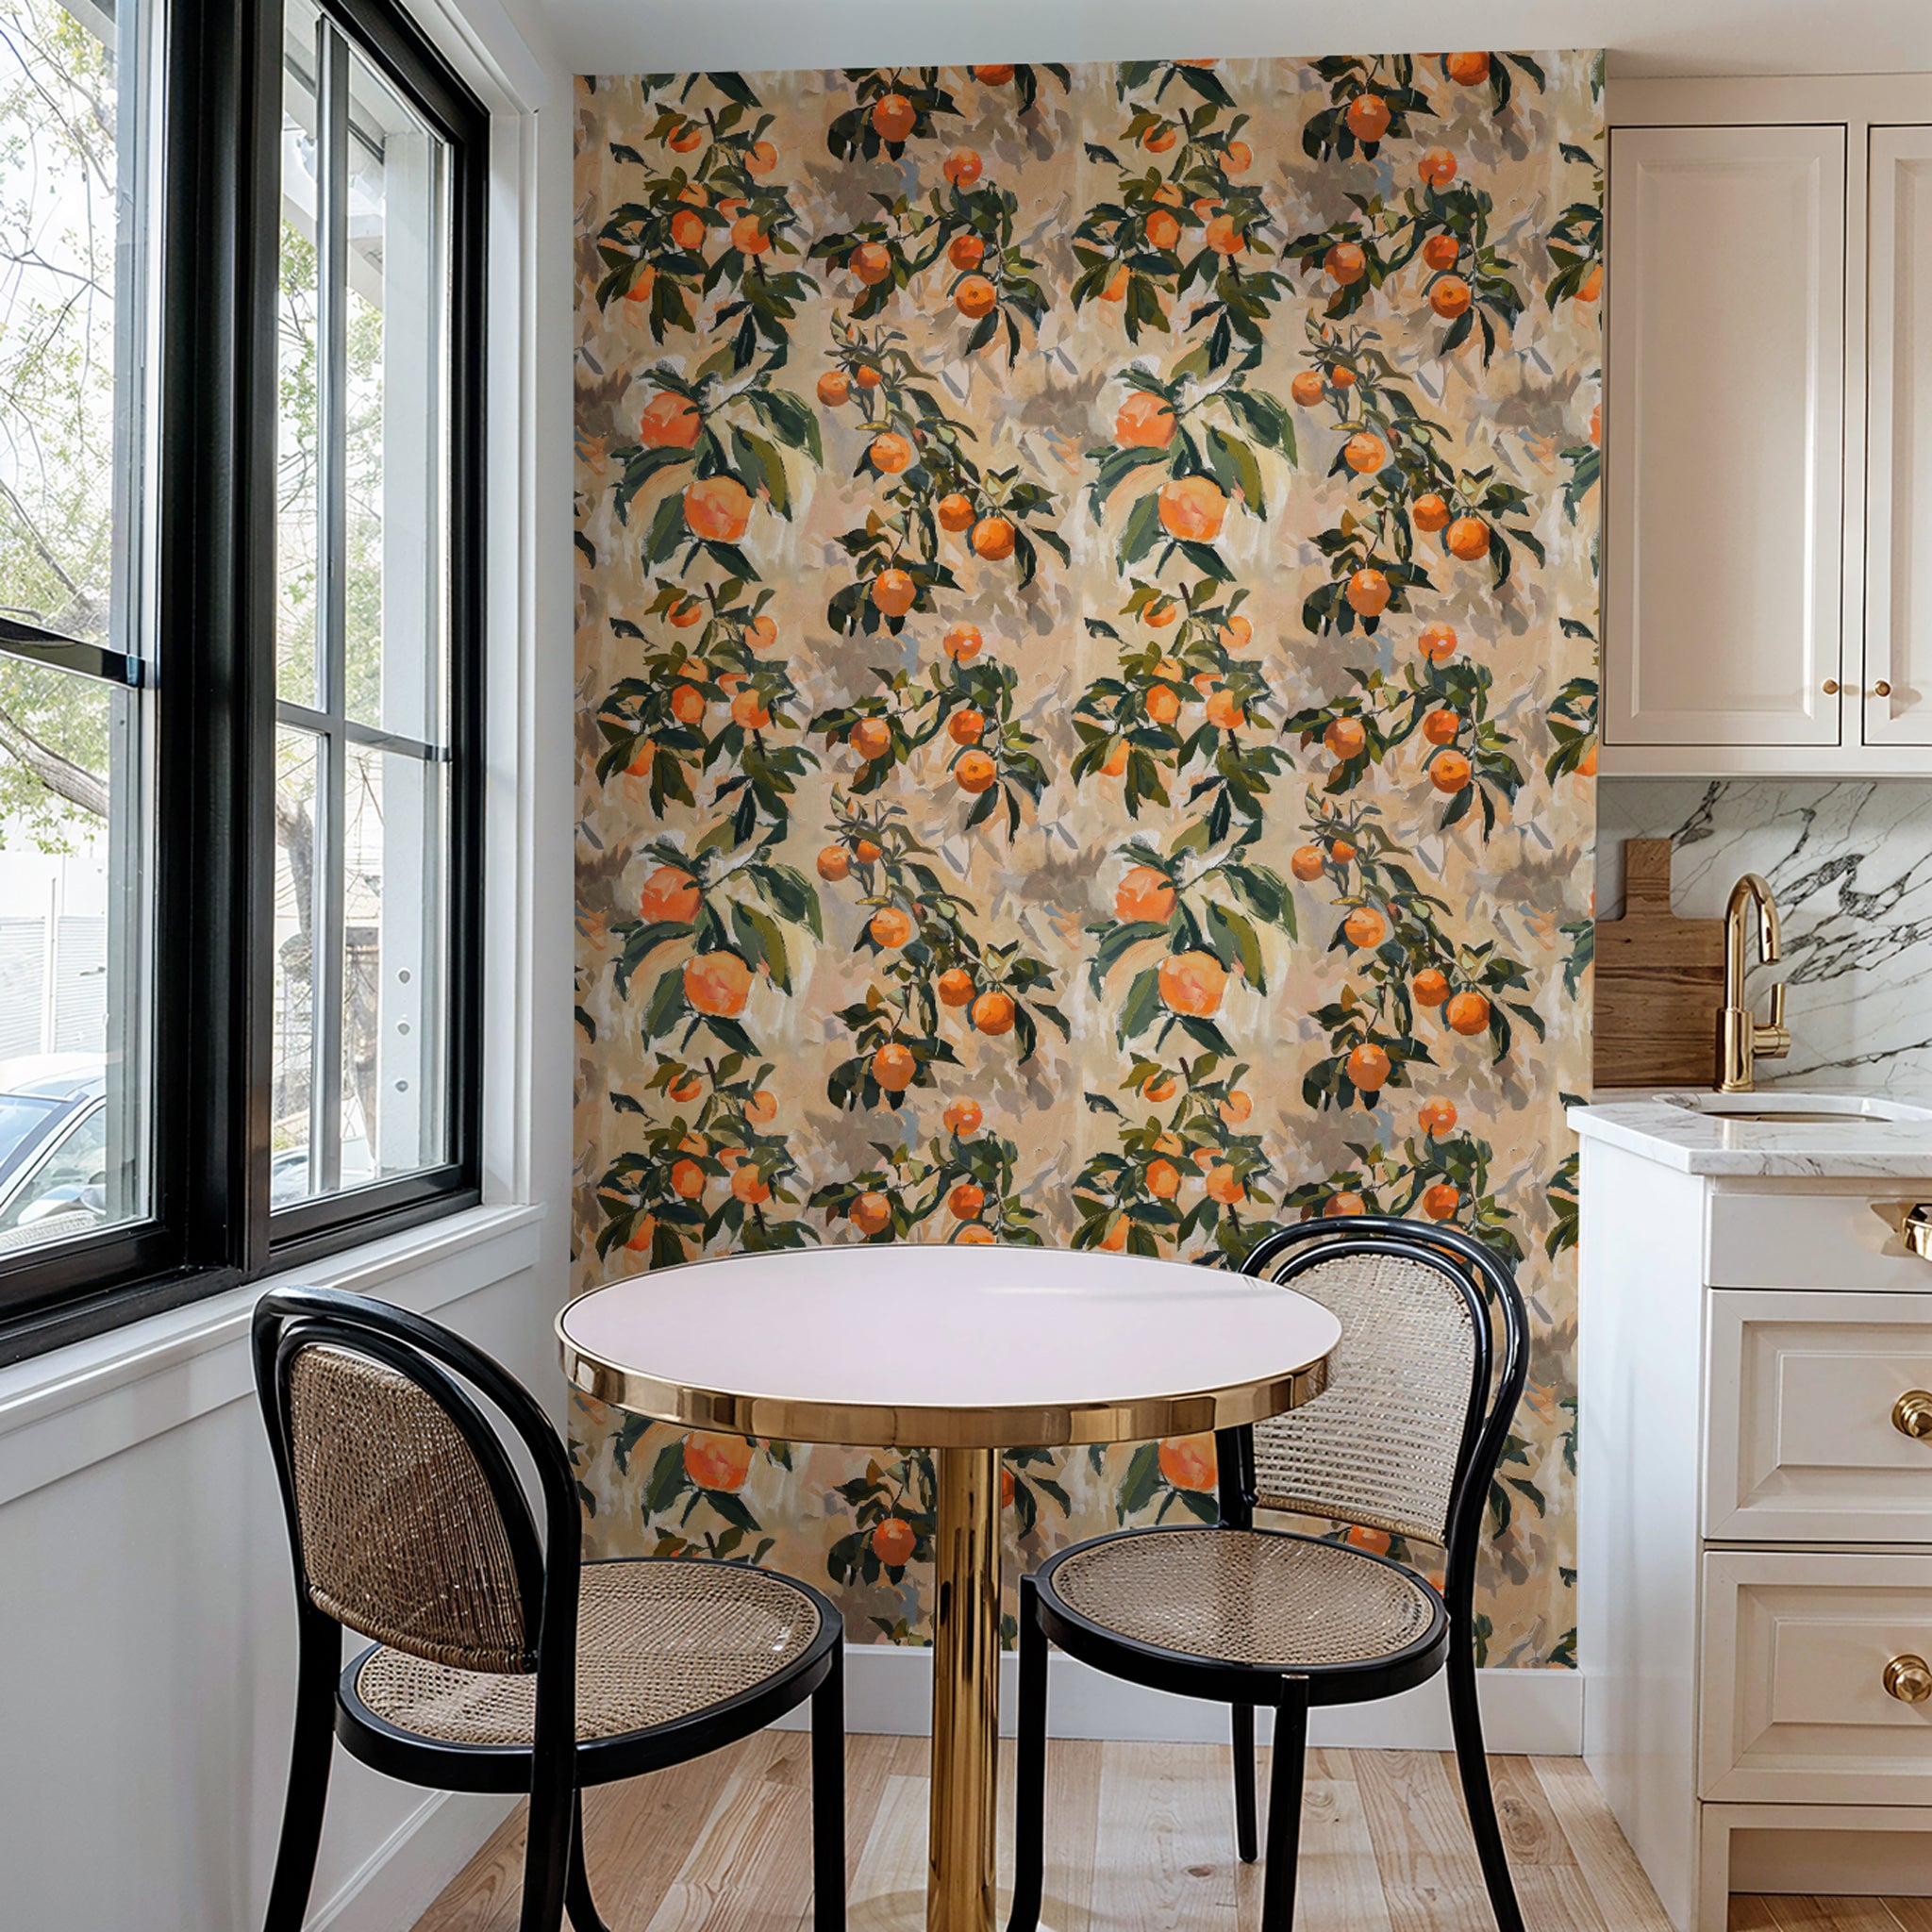 "Clementine Wallpaper by Wall Blush featuring in a stylish kitchen, with focus on the vibrant, fruit-themed design."